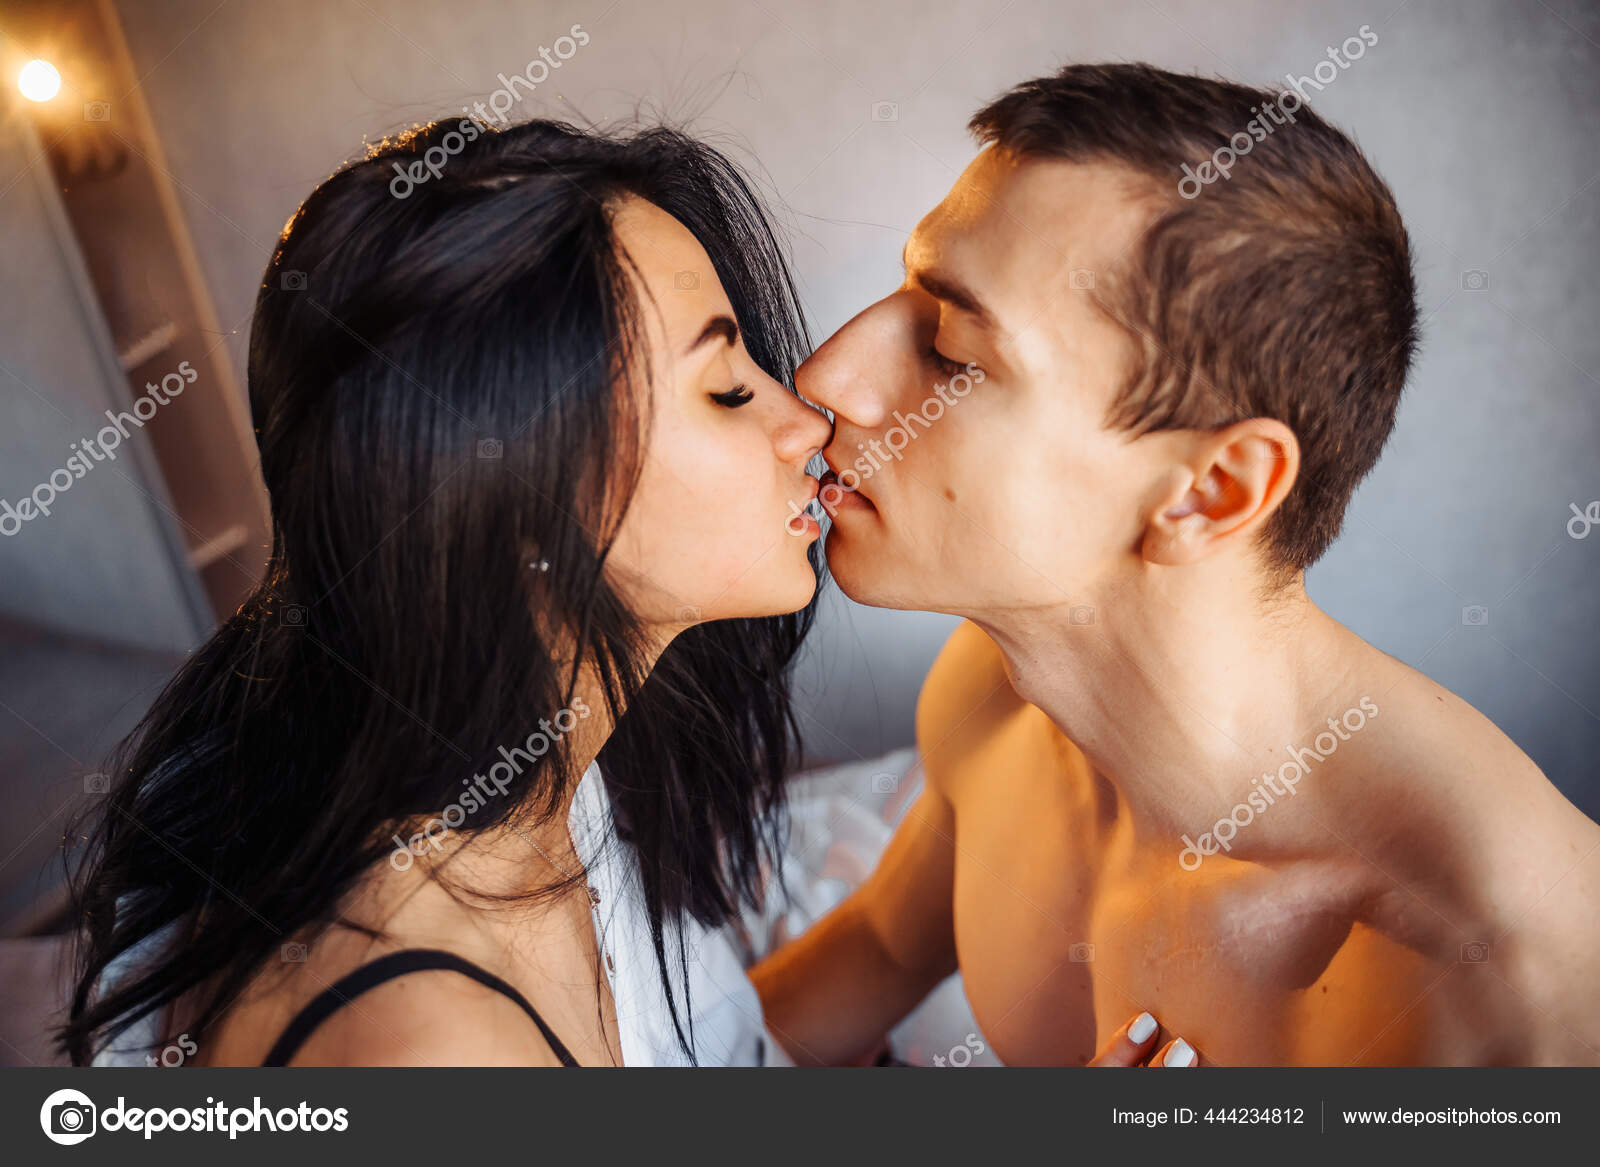 Close Beautiful Nude Couple Two Young People Love Having Sex Stock Photo by ©dariaagaf 444234812 image picture